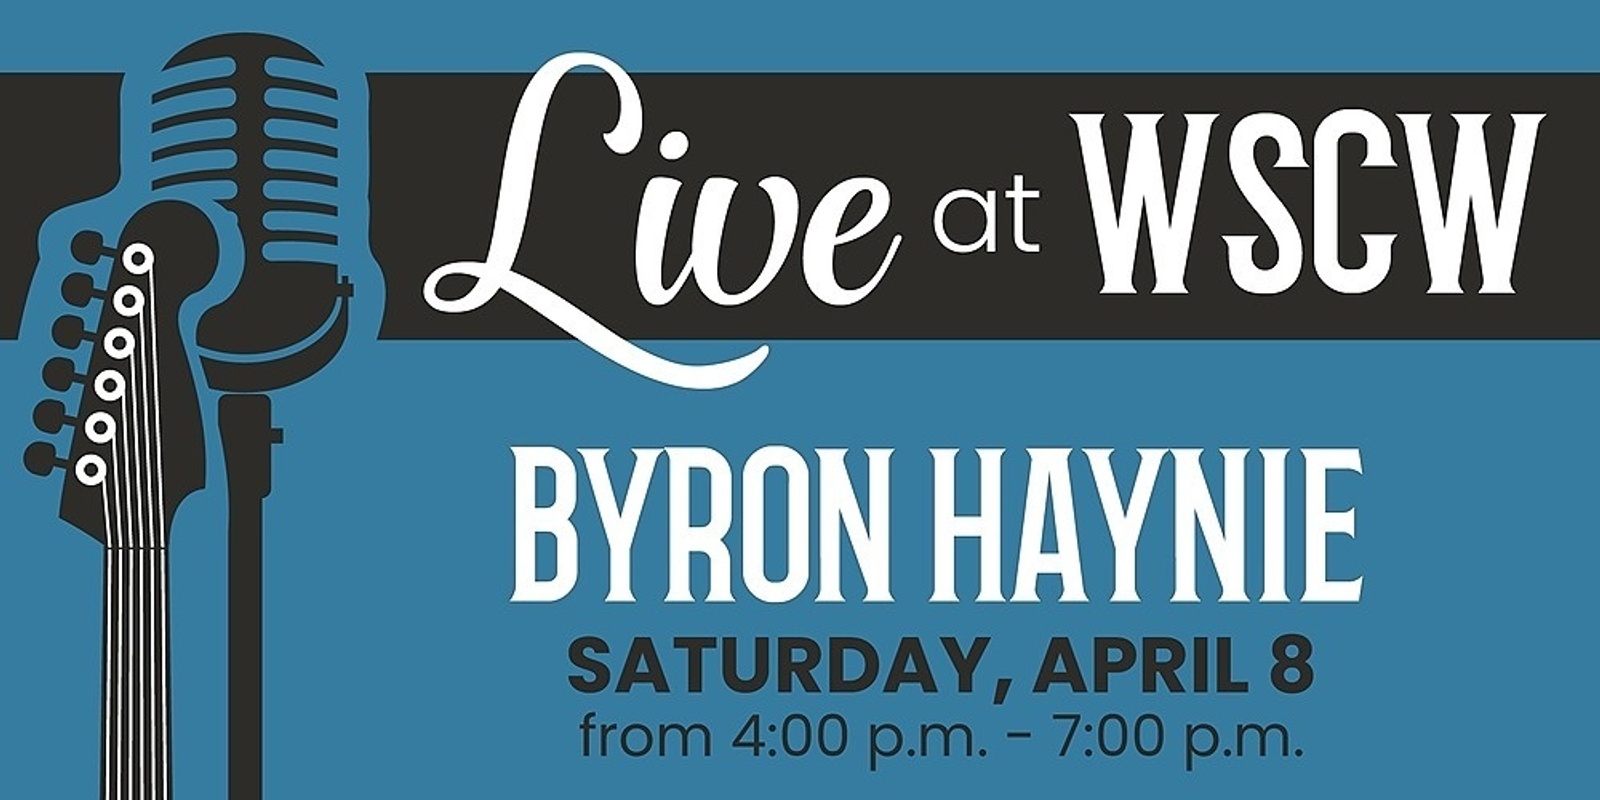 Banner image for Byron Haynie Live at WSCW April 8